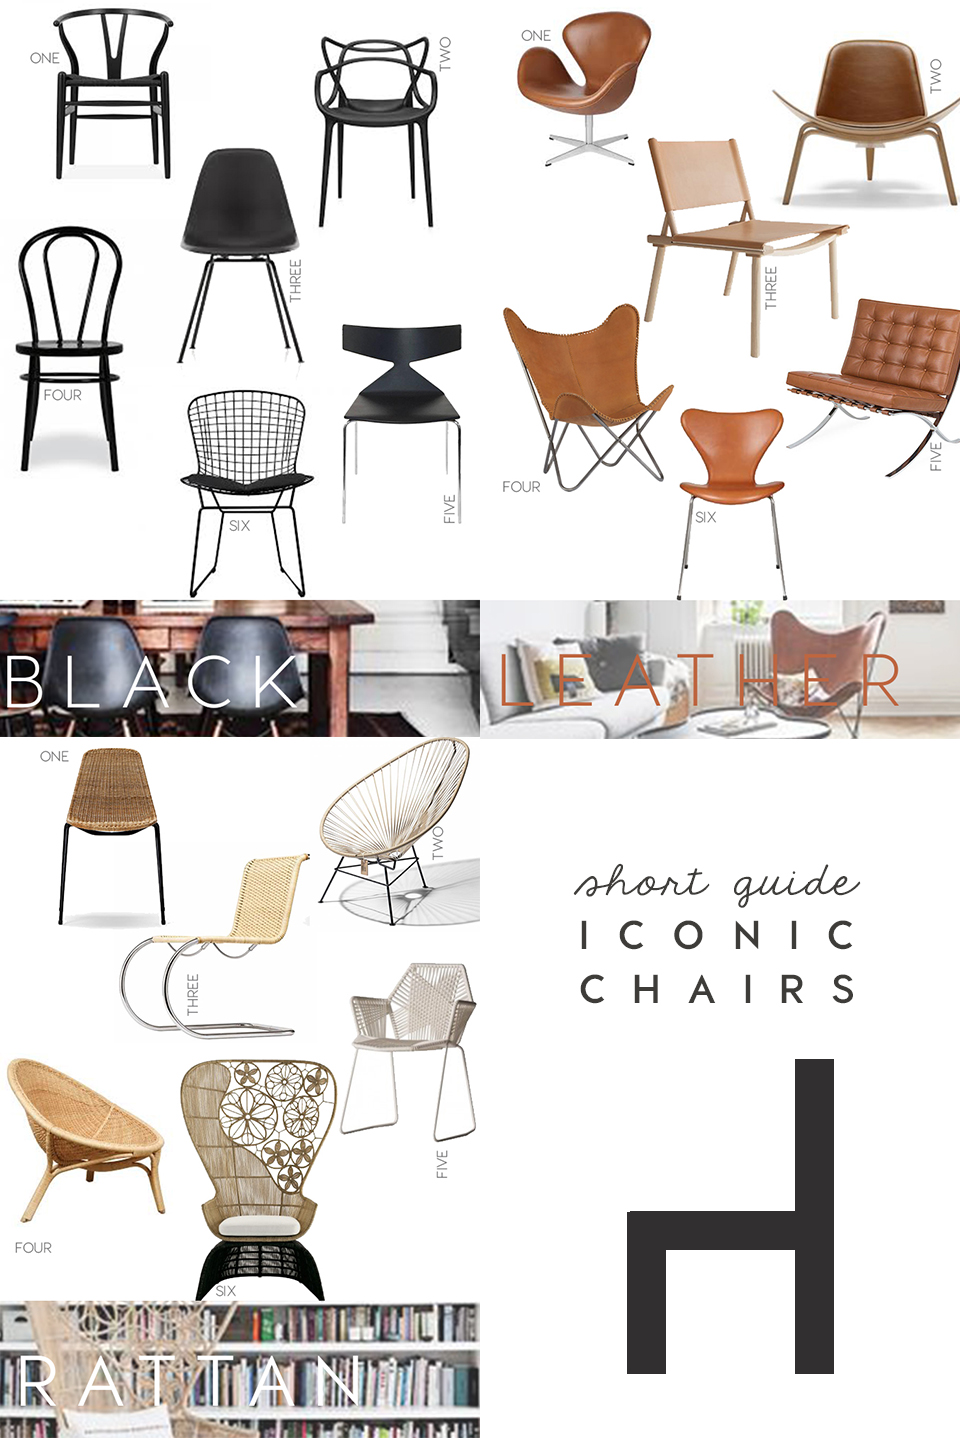 iconic seatings, design icons, chairs, black chairs design, rattan chairs, leather accent chair, interior trends, italianbark interior design blog